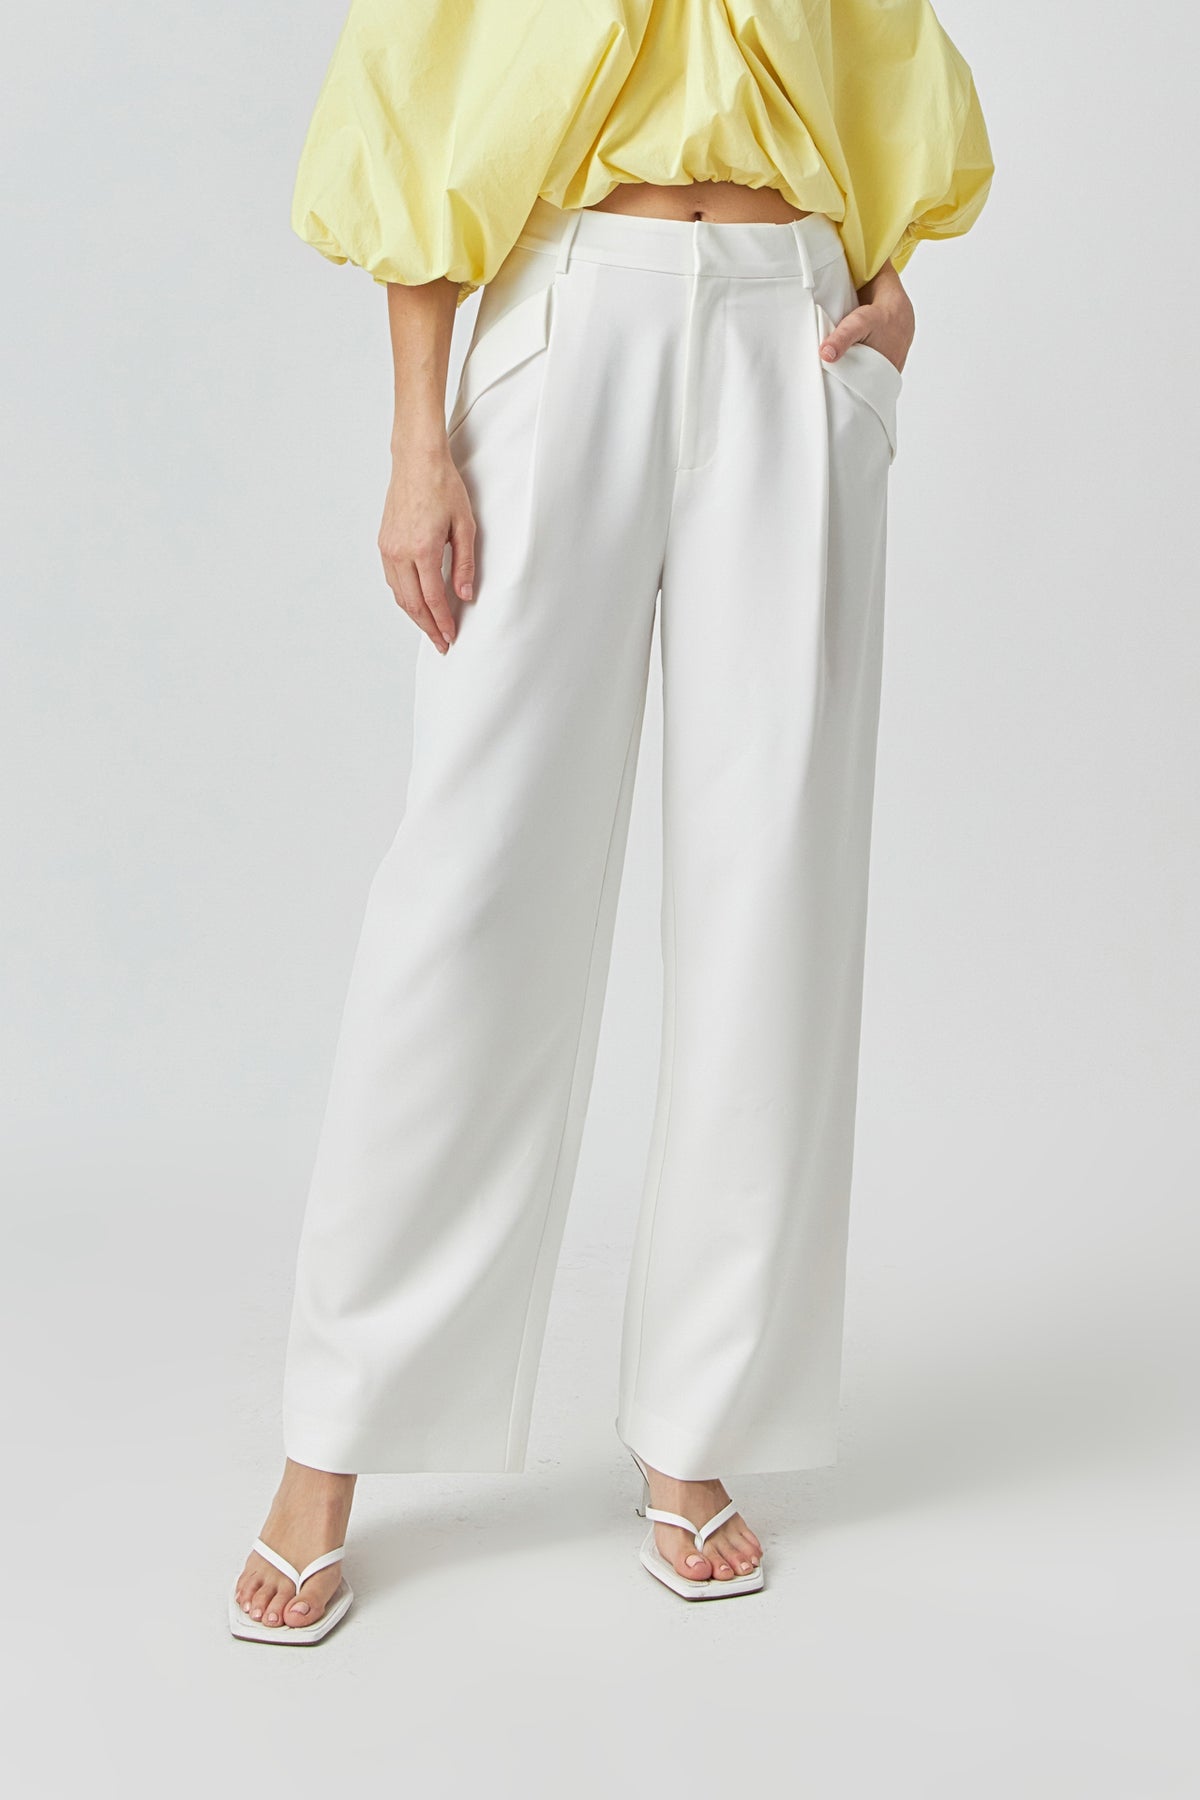 ENDLESS ROSE - Low Rise Pocket Trousers - PANTS available at Objectrare